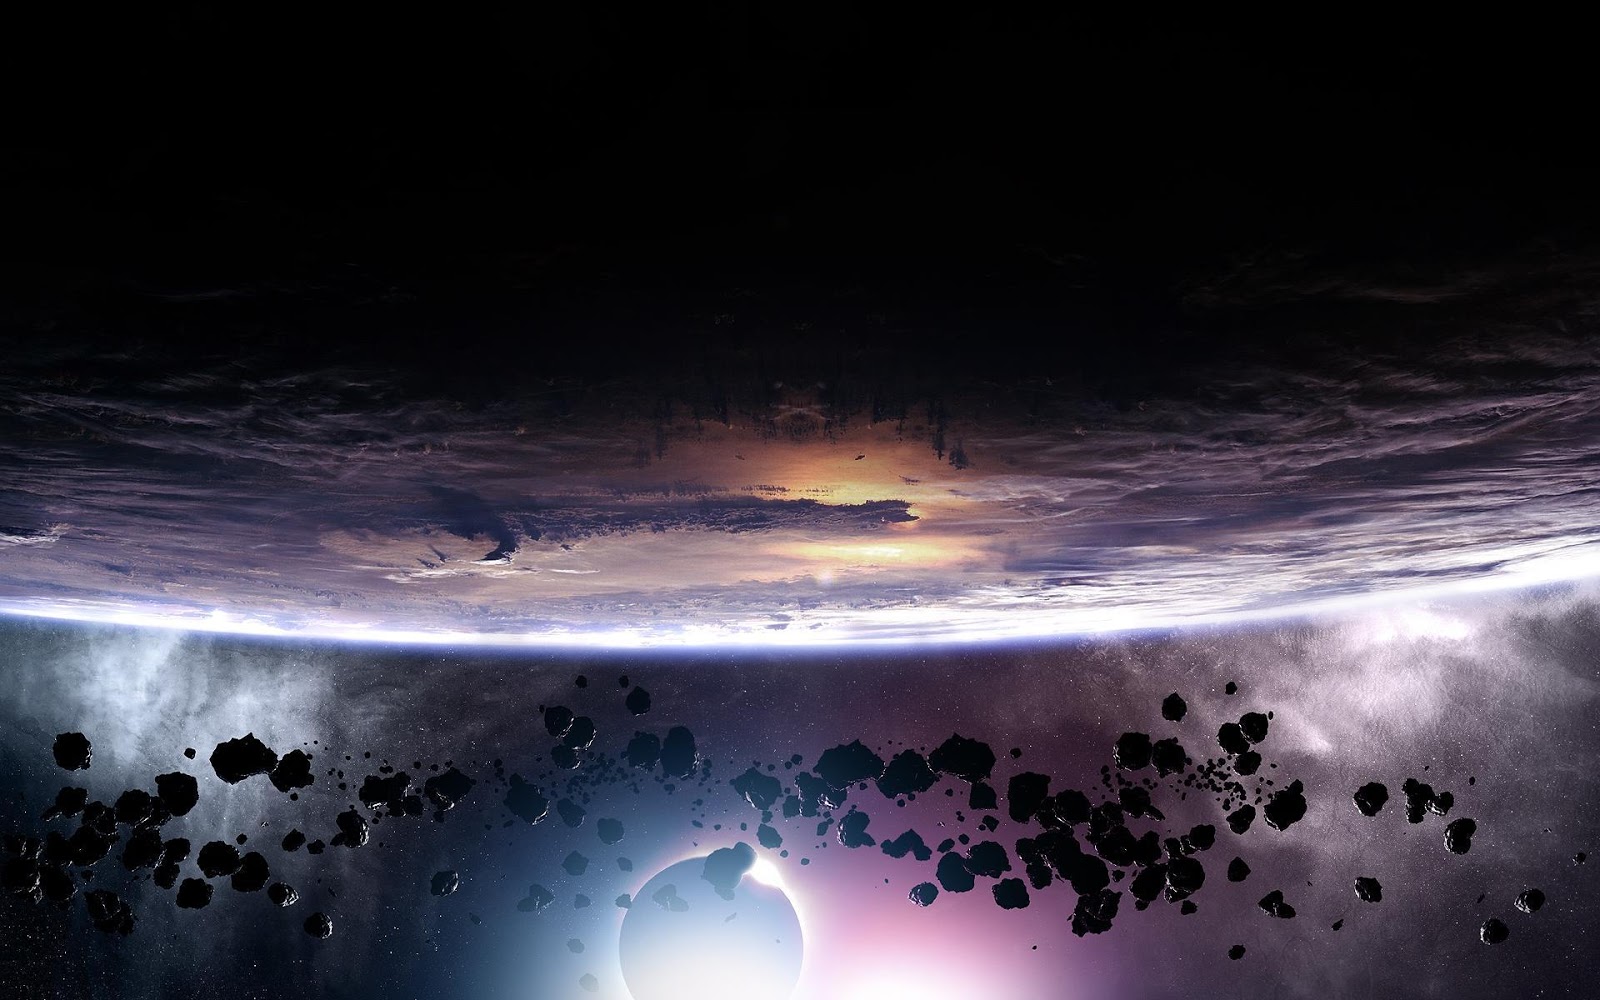 Gup Shup 28 Amazing Space Wallpapers In Hd - HD Wallpaper 